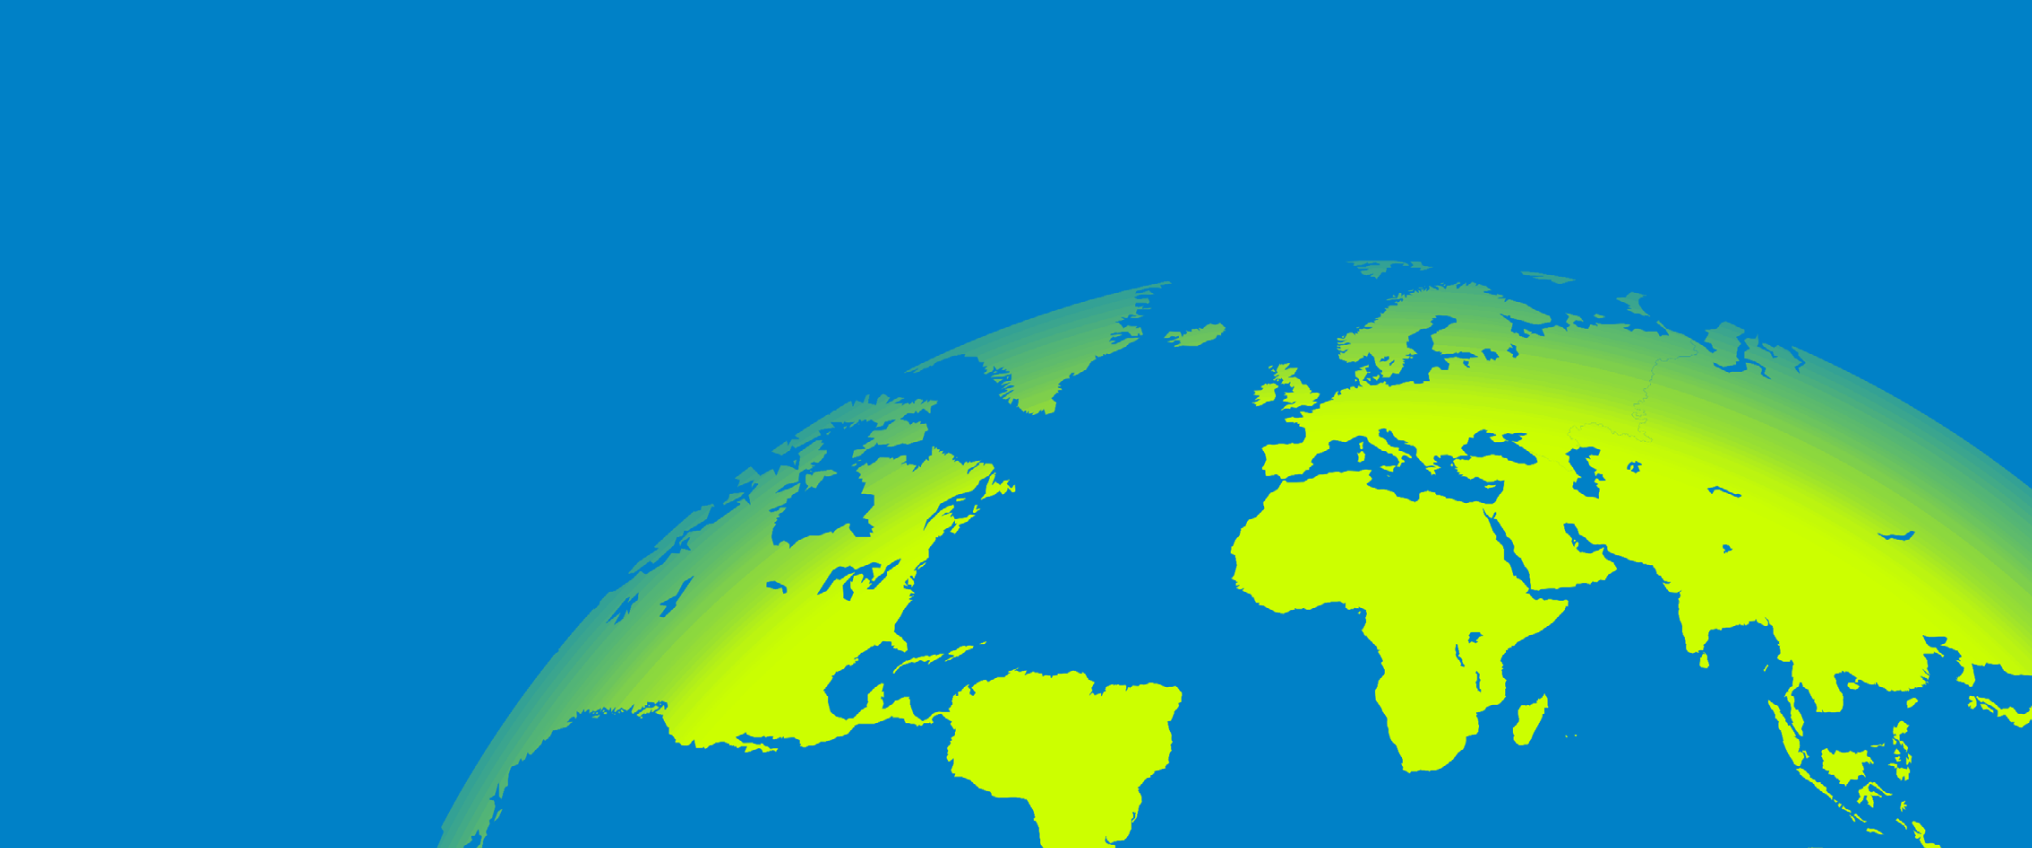 Illustration of the earth on a blue background